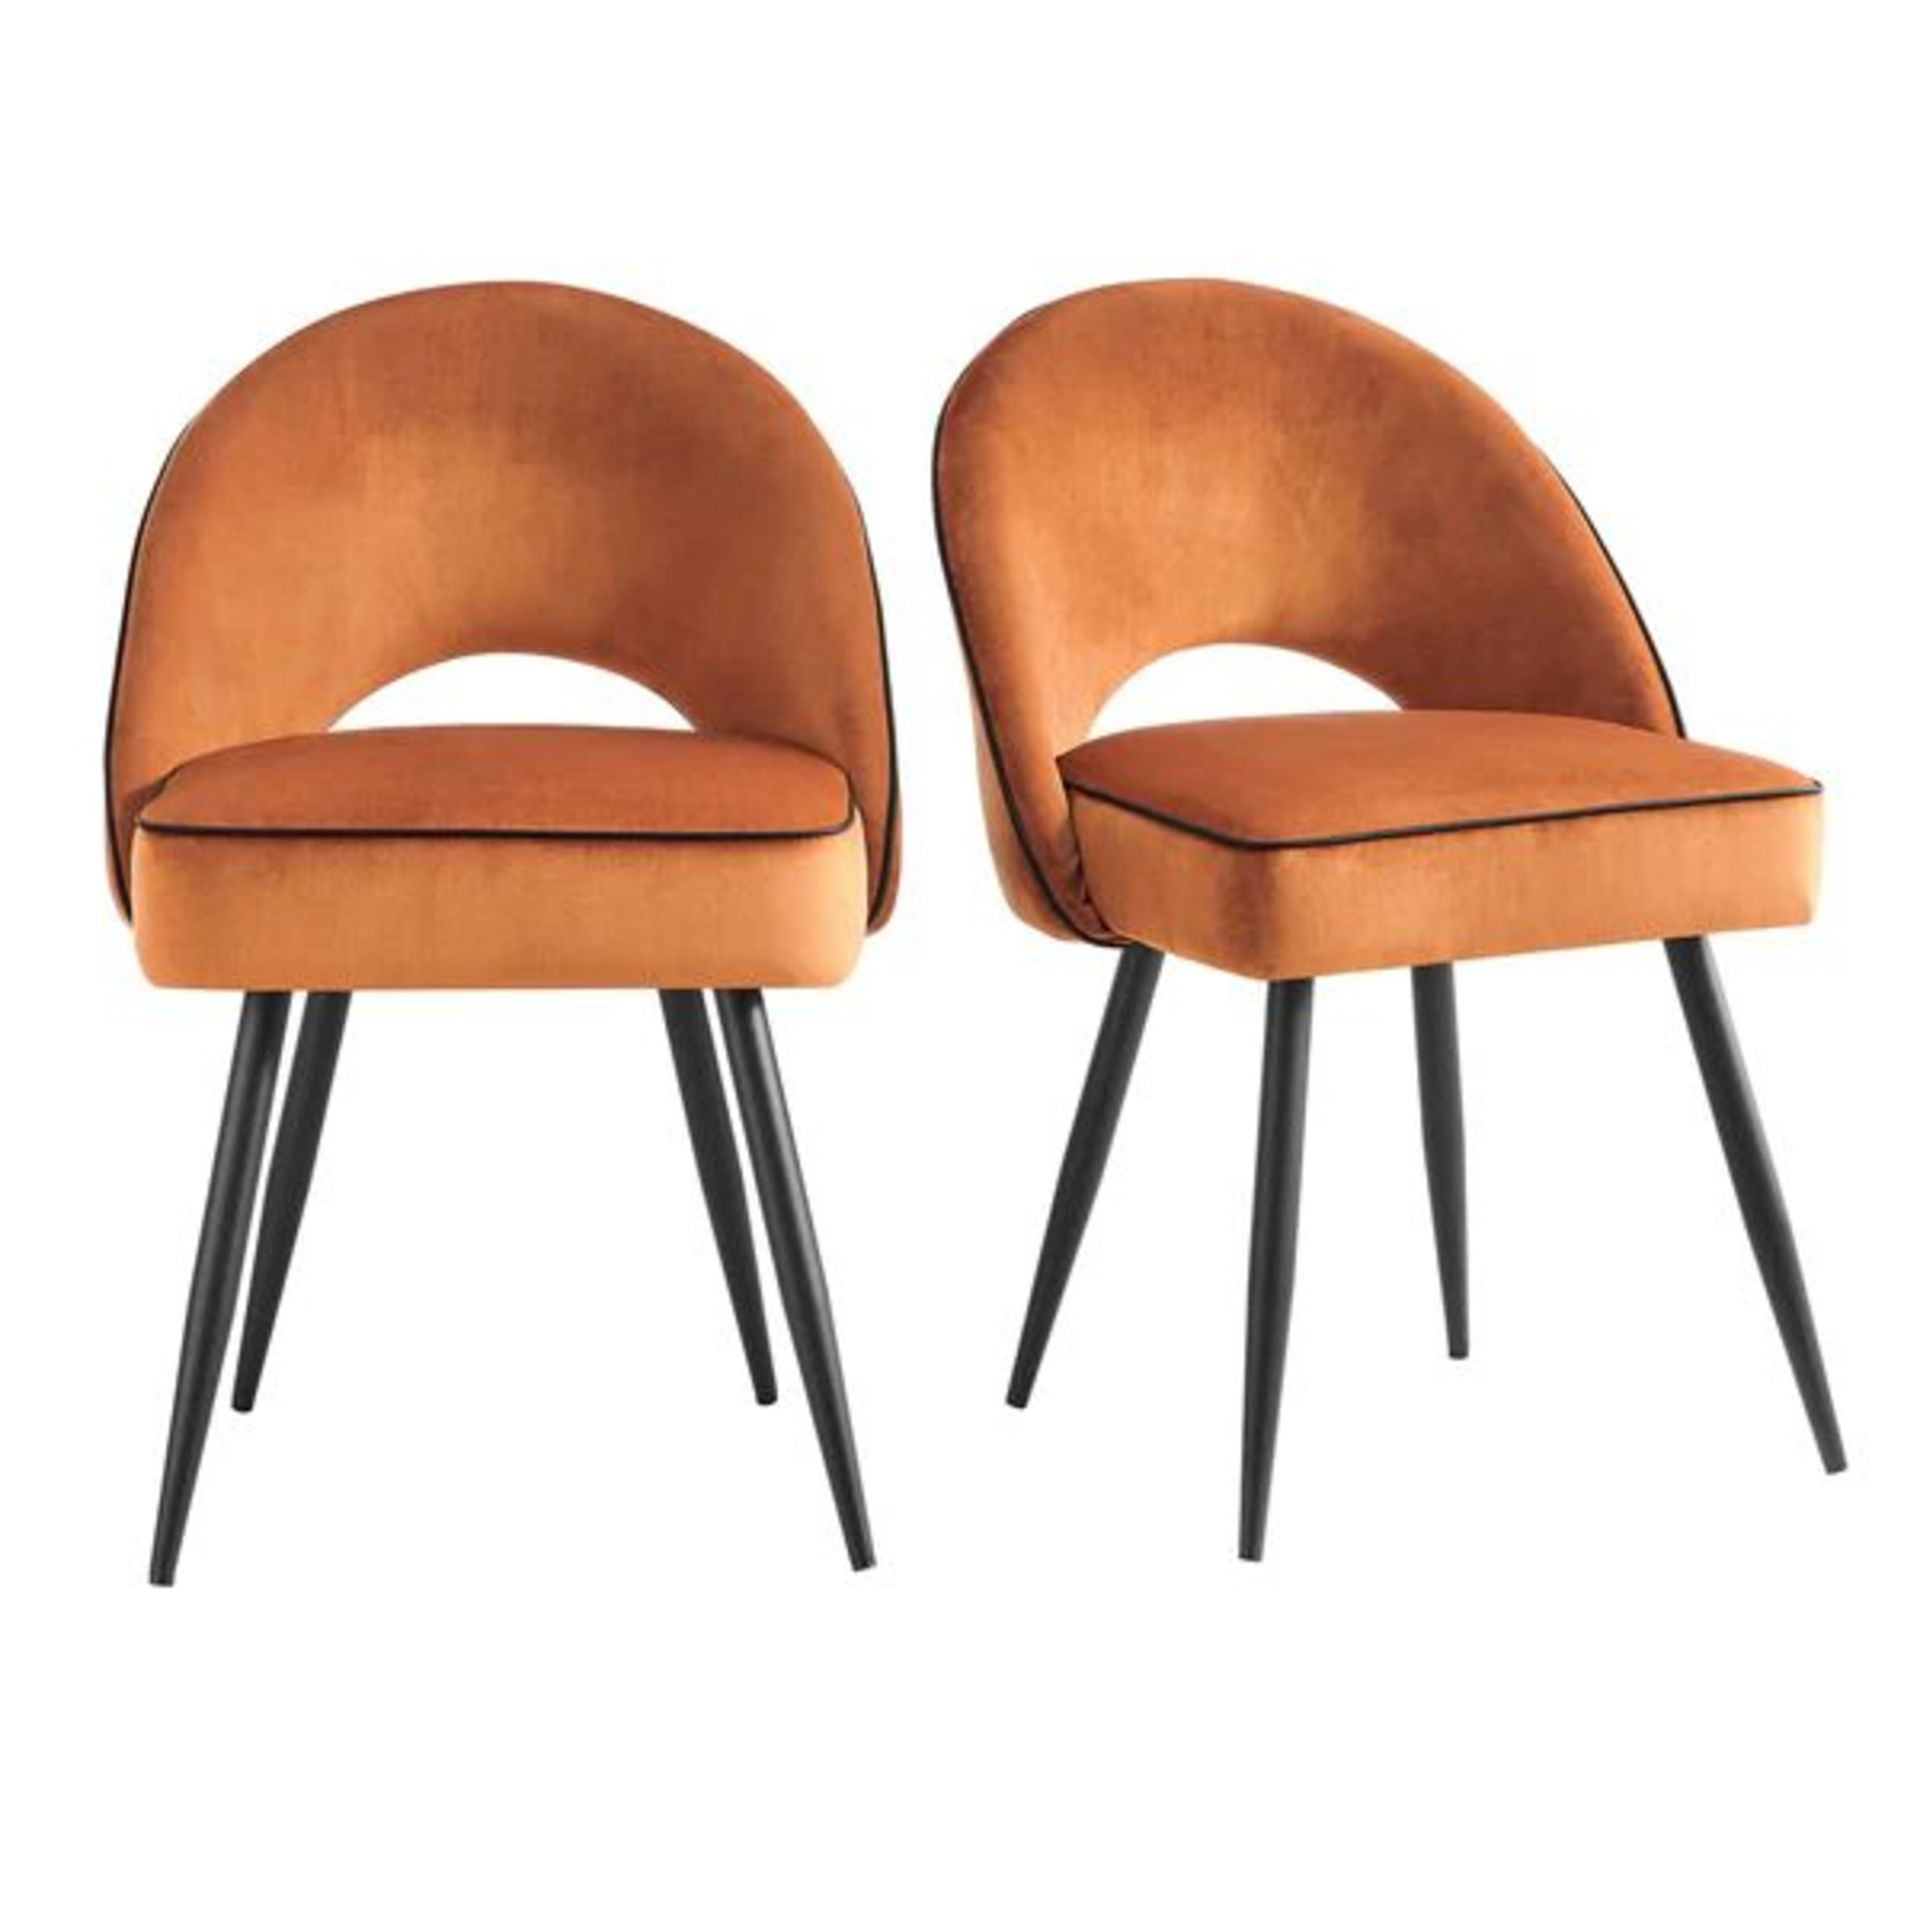 Oakley Set of 2 Orange Velvet Upholstered Dining Chairs with Contrast Piping. - ER30. RRP £279.99. - Image 2 of 2